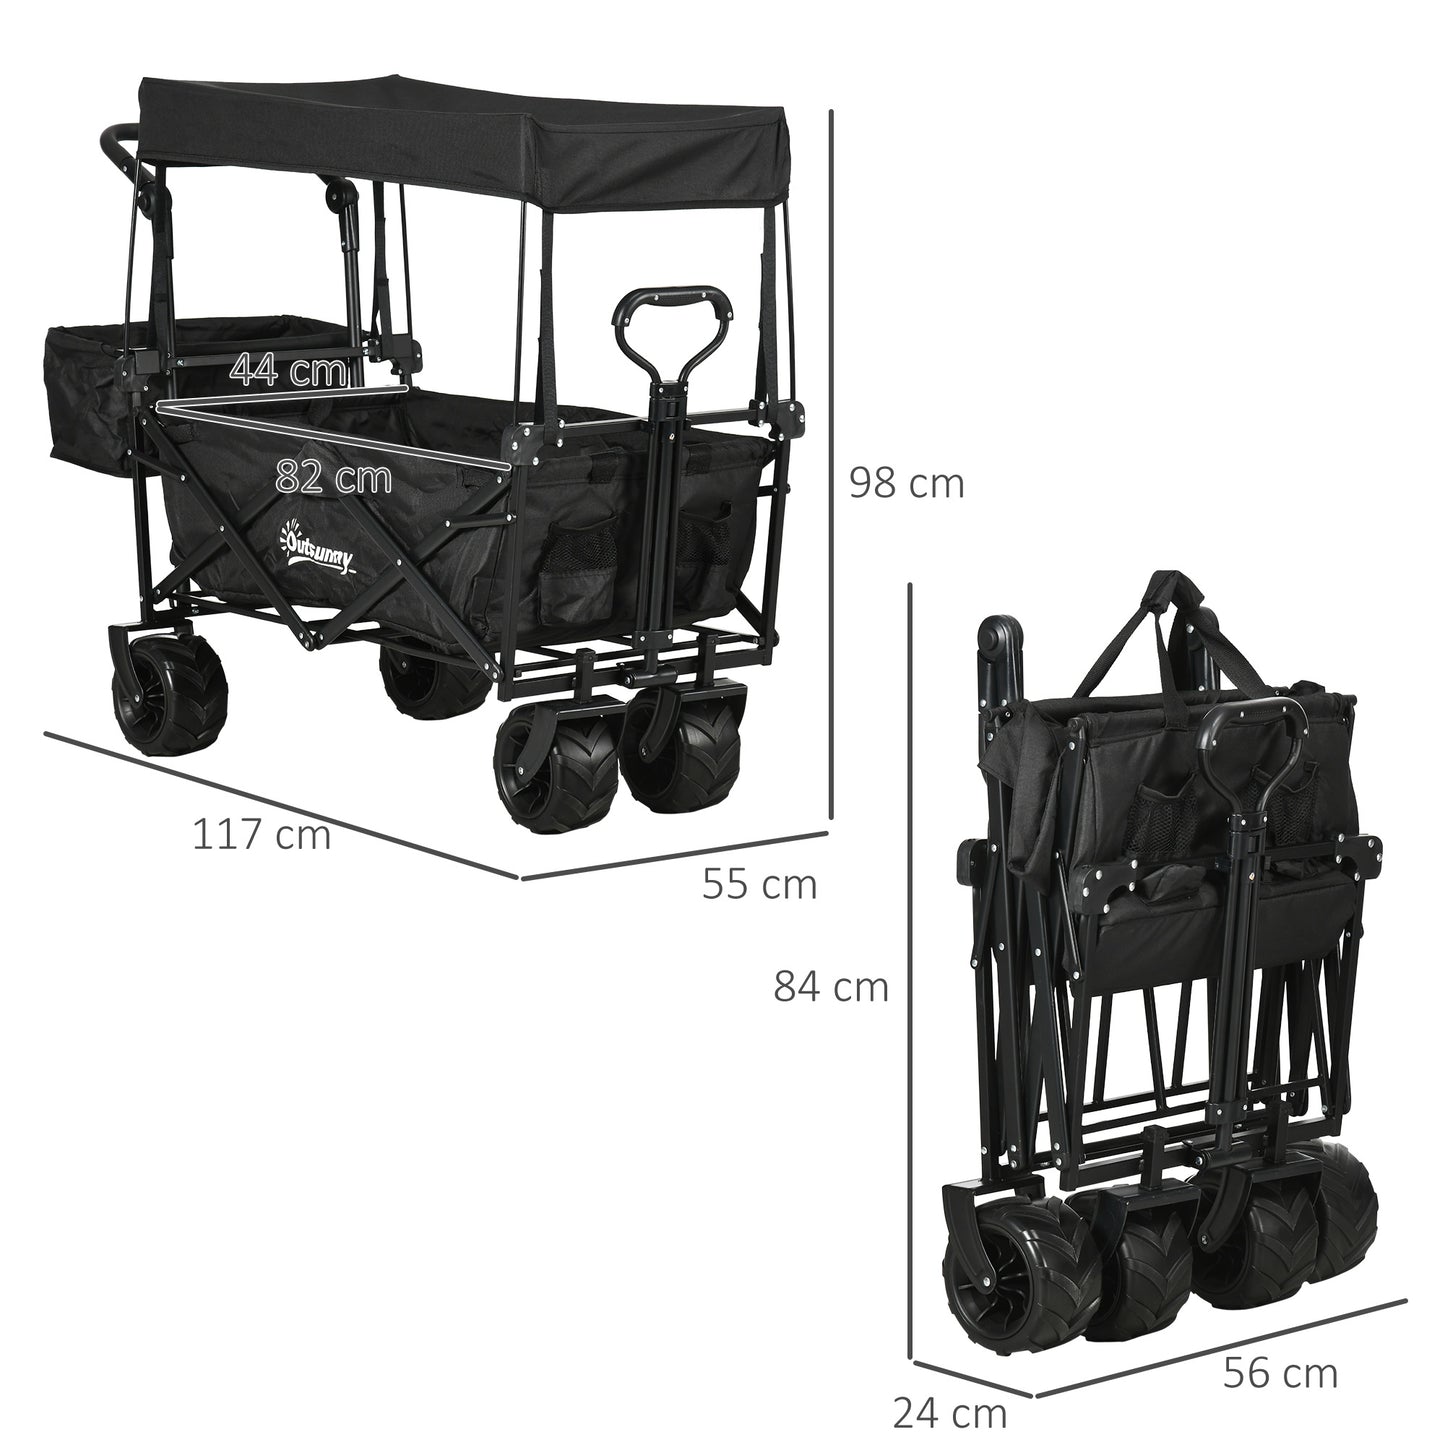 Outsunny Folding Trolley Cart Storage Wagon Beach Trailer 4 Wheels with Handle Overhead Canopy Cart Push Pull for Camping, Black